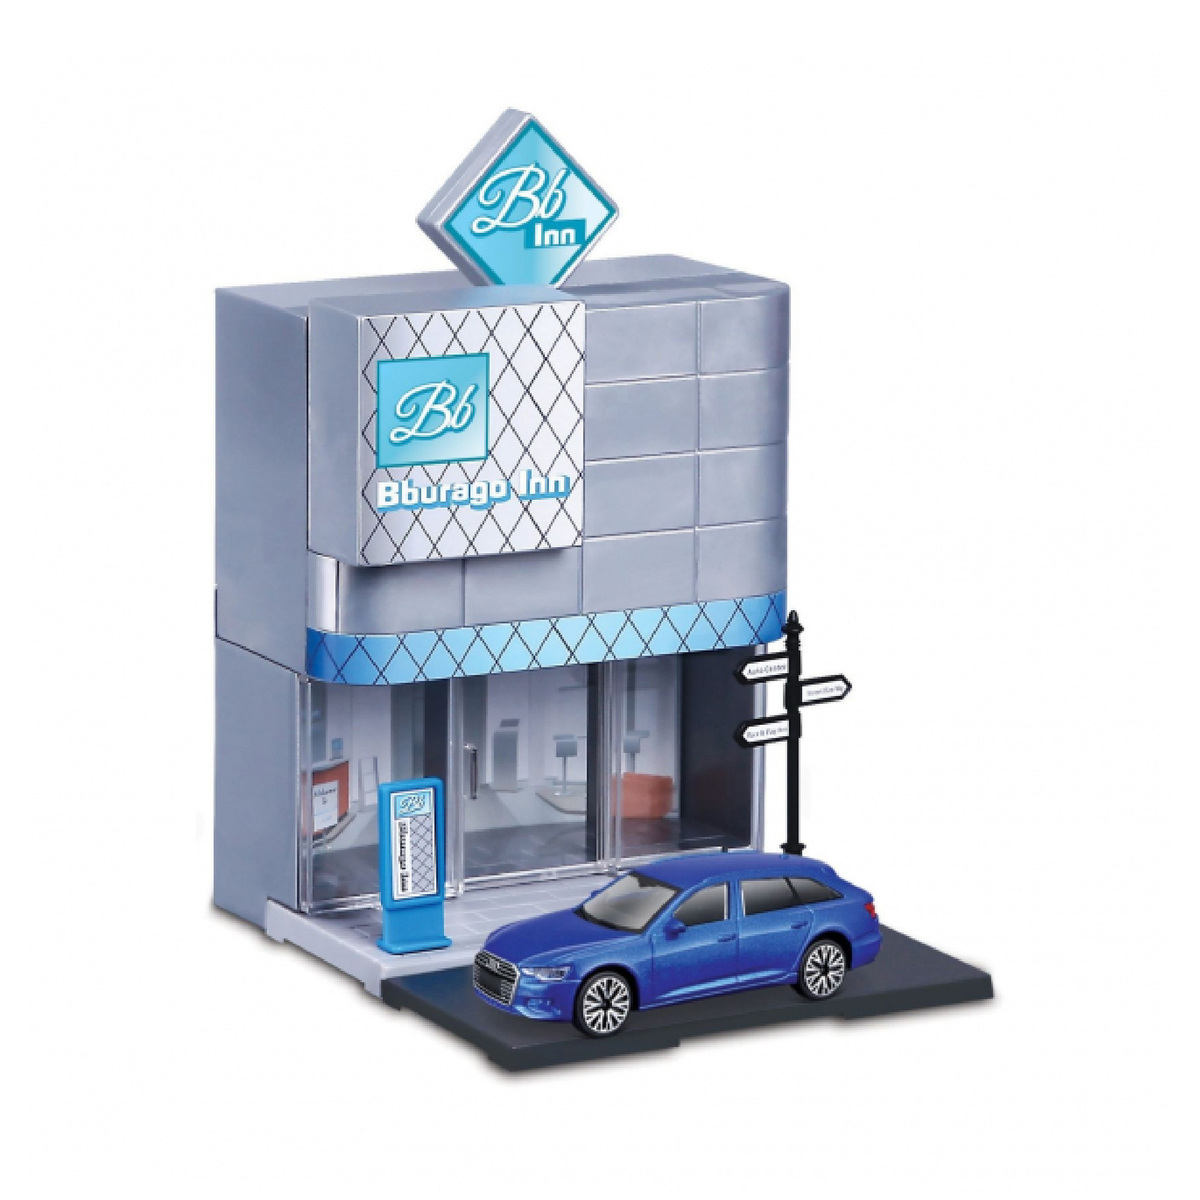 Bburago 1:43 Scale Street Fire Series Hotel with 1 Toy Car 31503